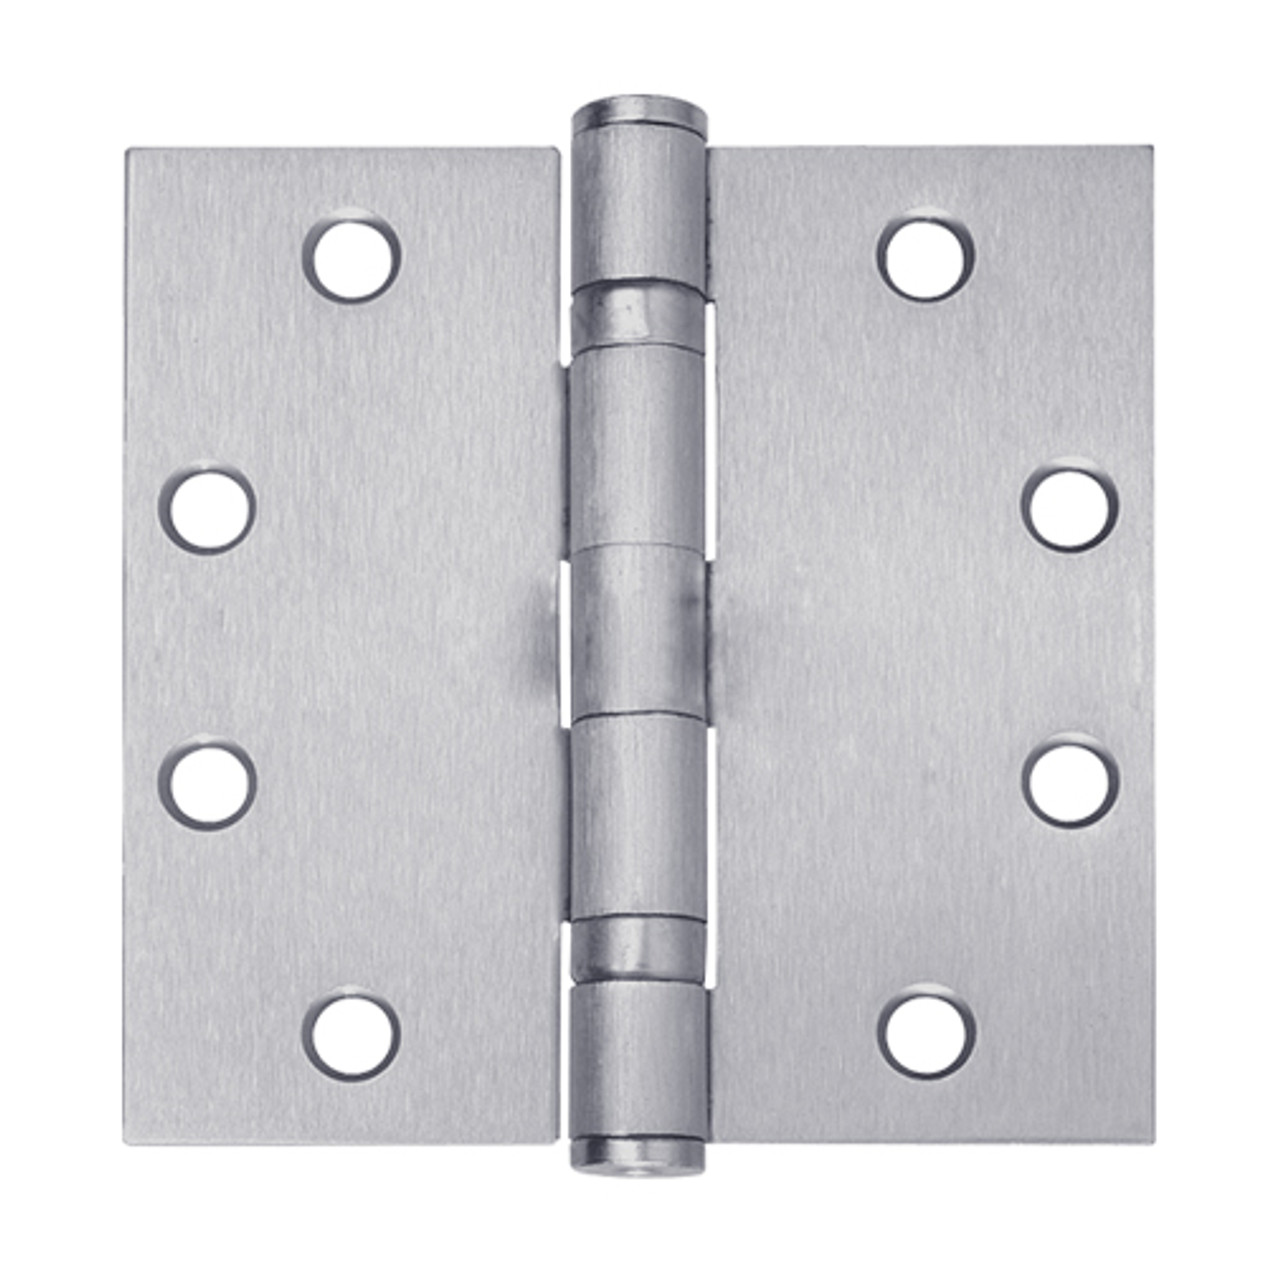 5BB1-4x4-652-NRP IVES 5 Knuckle Ball Bearing Full Mortise Hinge in Satin Chrome Plated